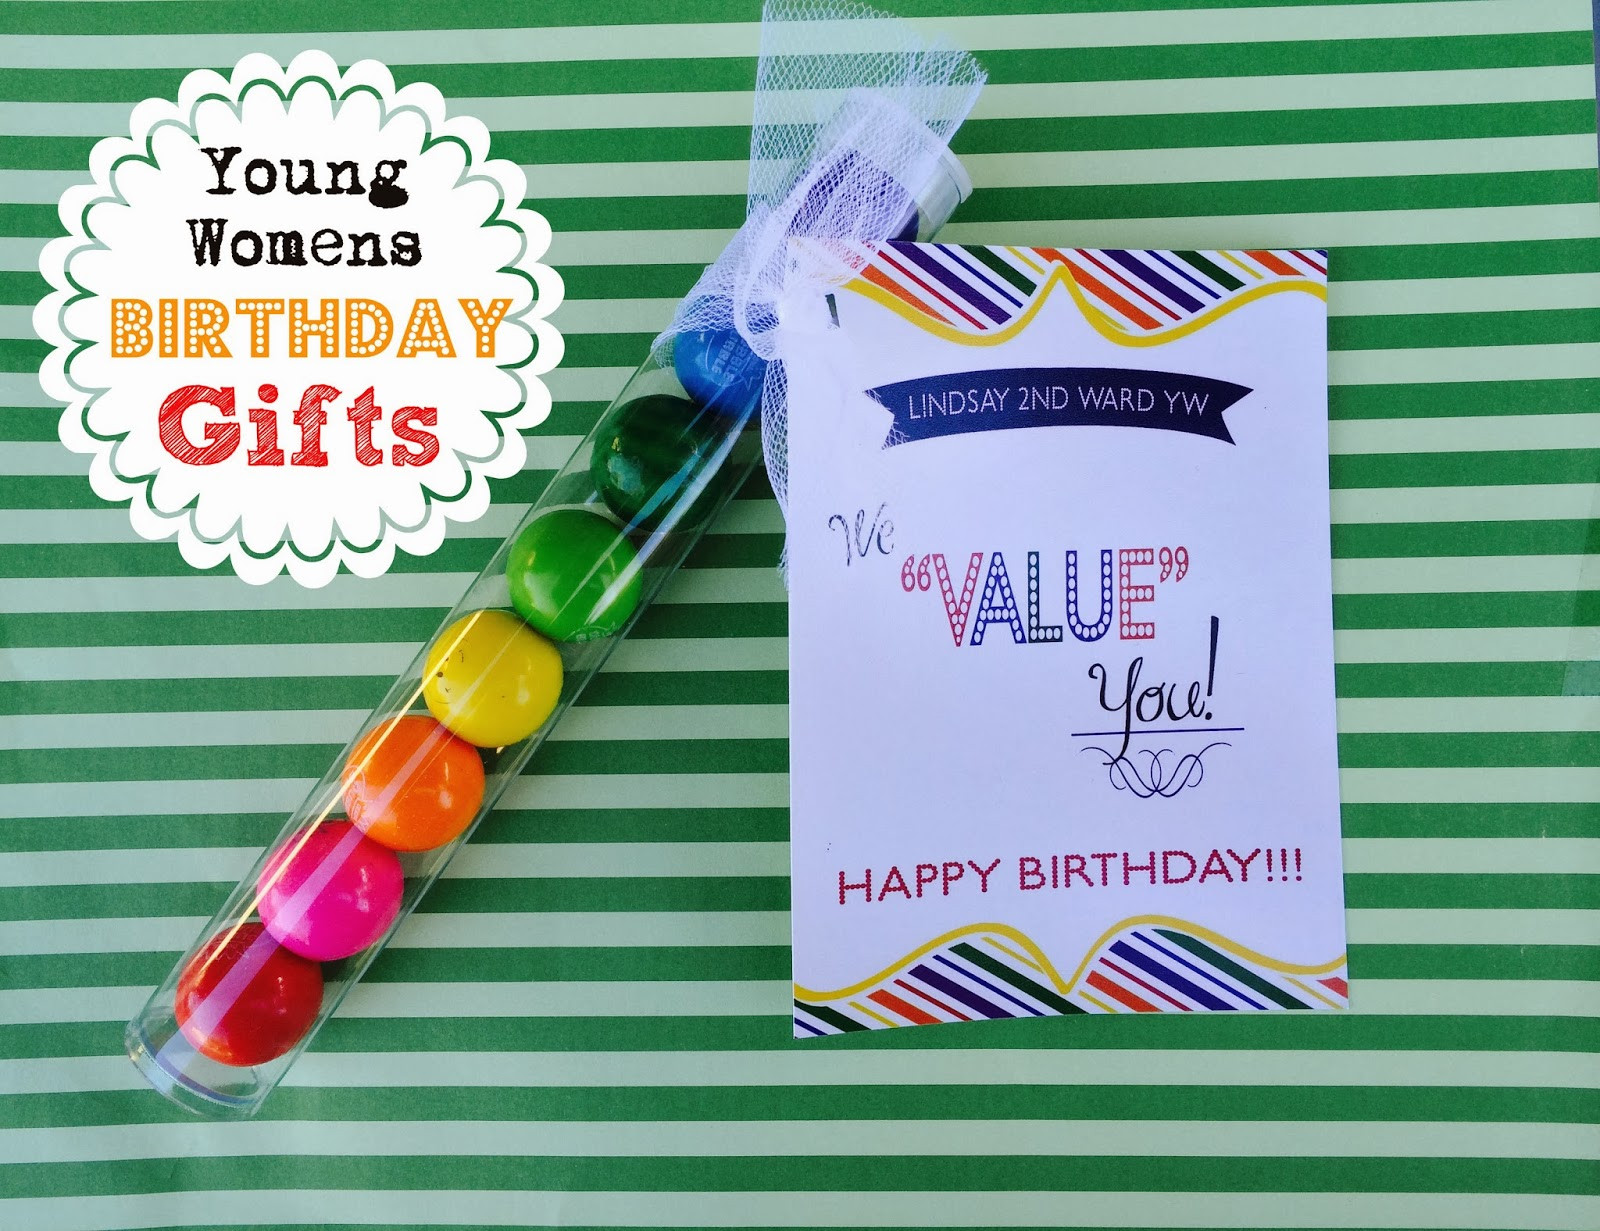 Womens Birthday Gift Ideas
 Marci Coombs Young Womens Birthday Gift idea with FREE